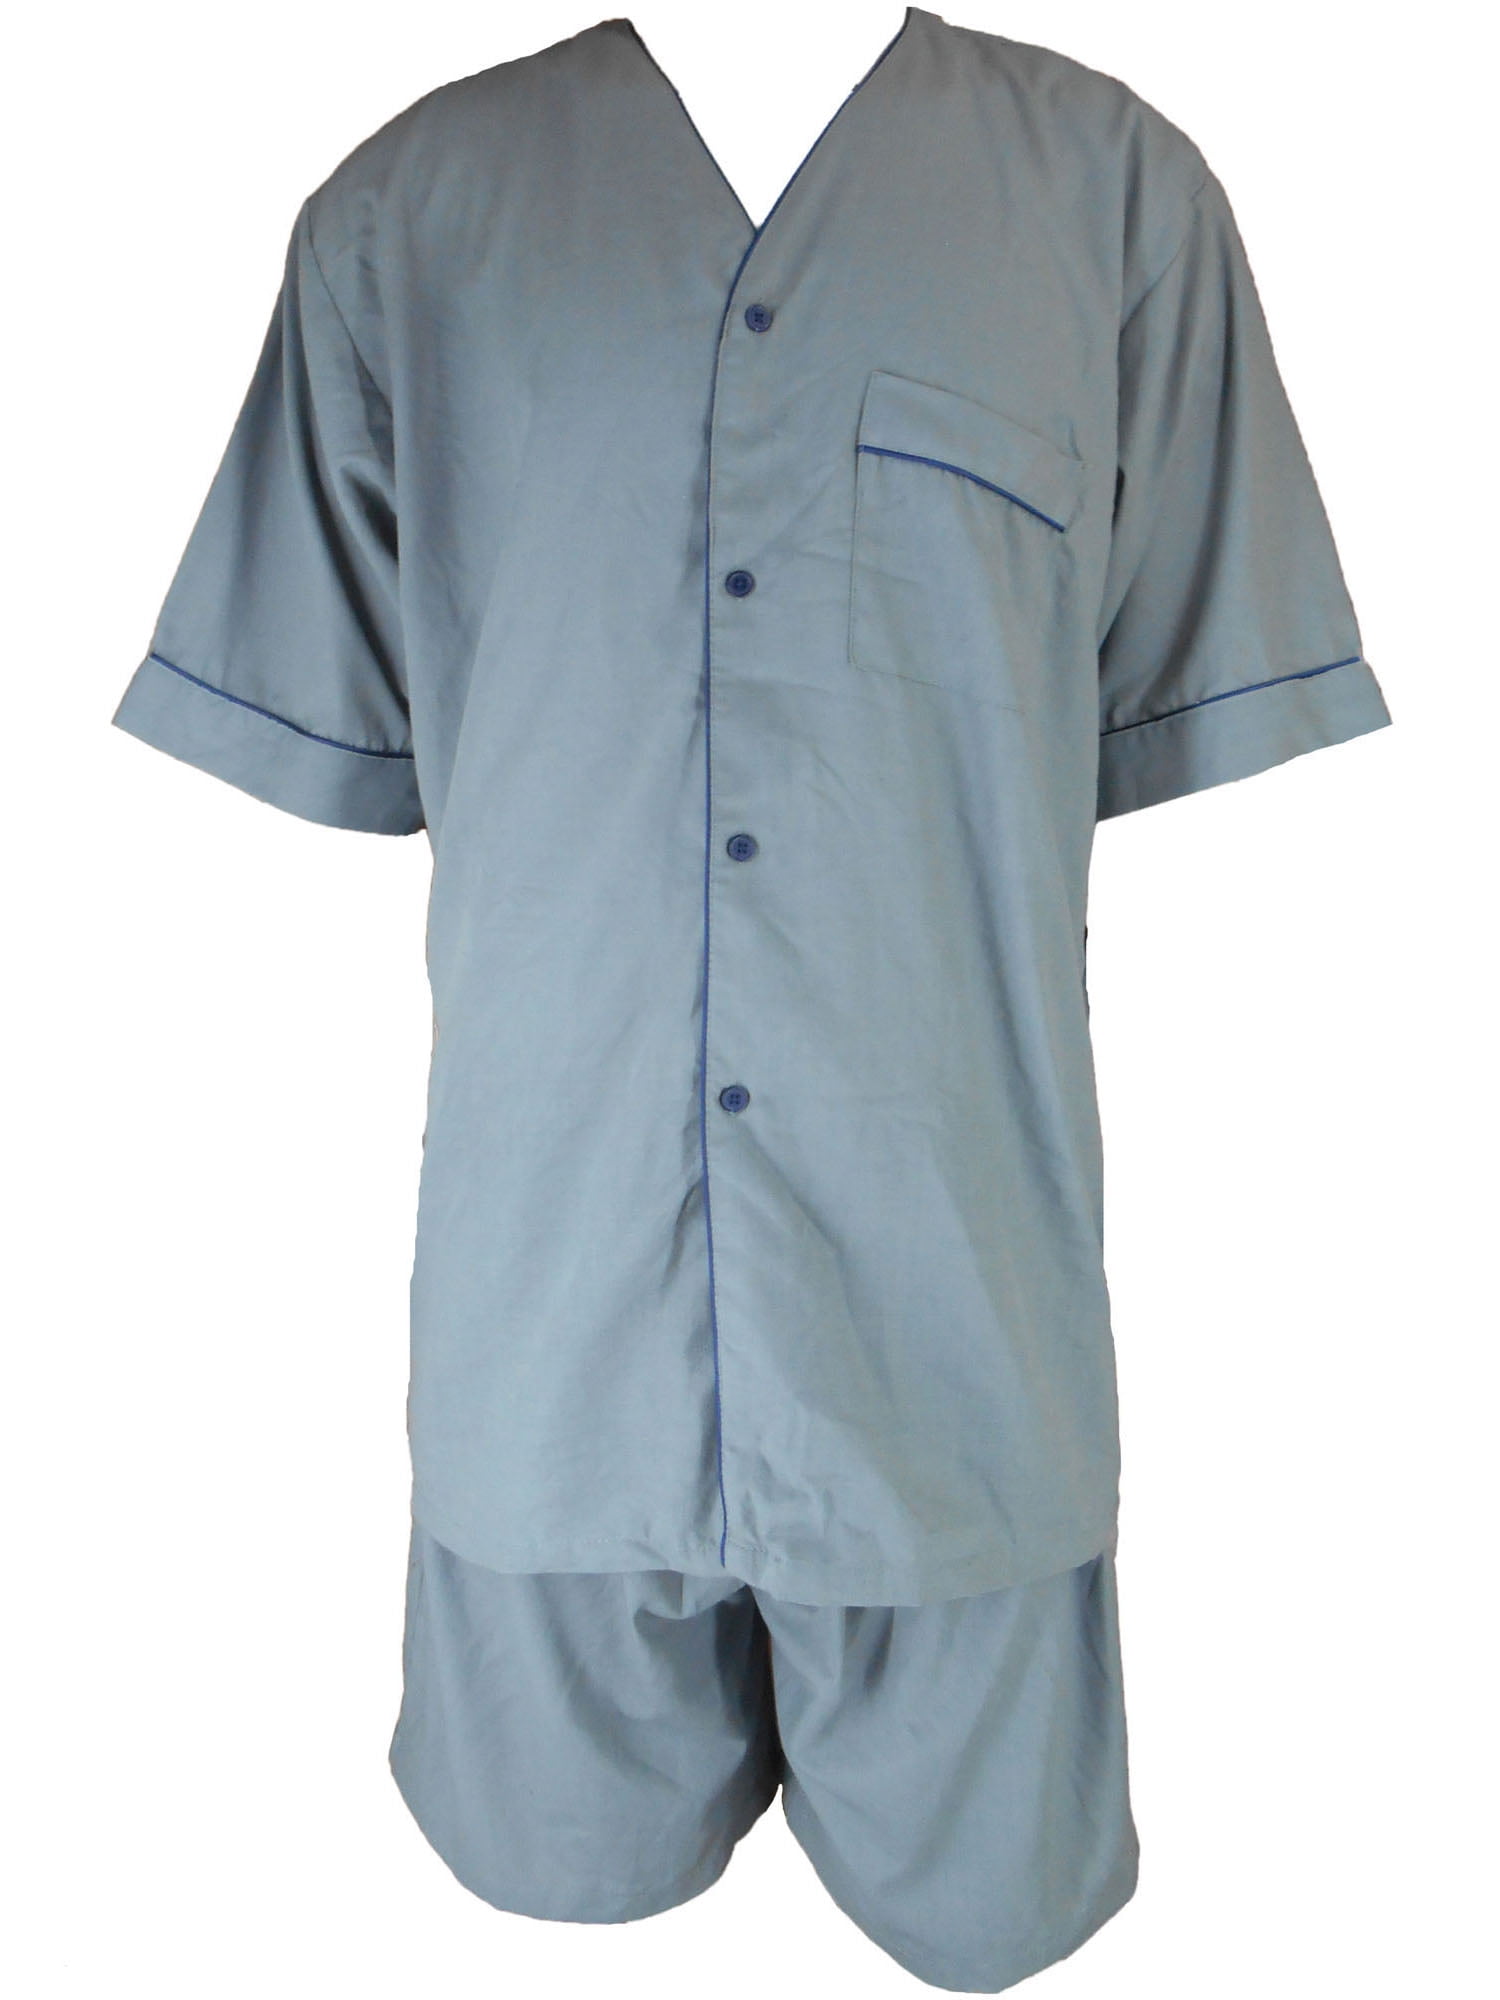 Up2date Fashion's Men's Woven Short-Sleeve Pajama Set with Shorts ...